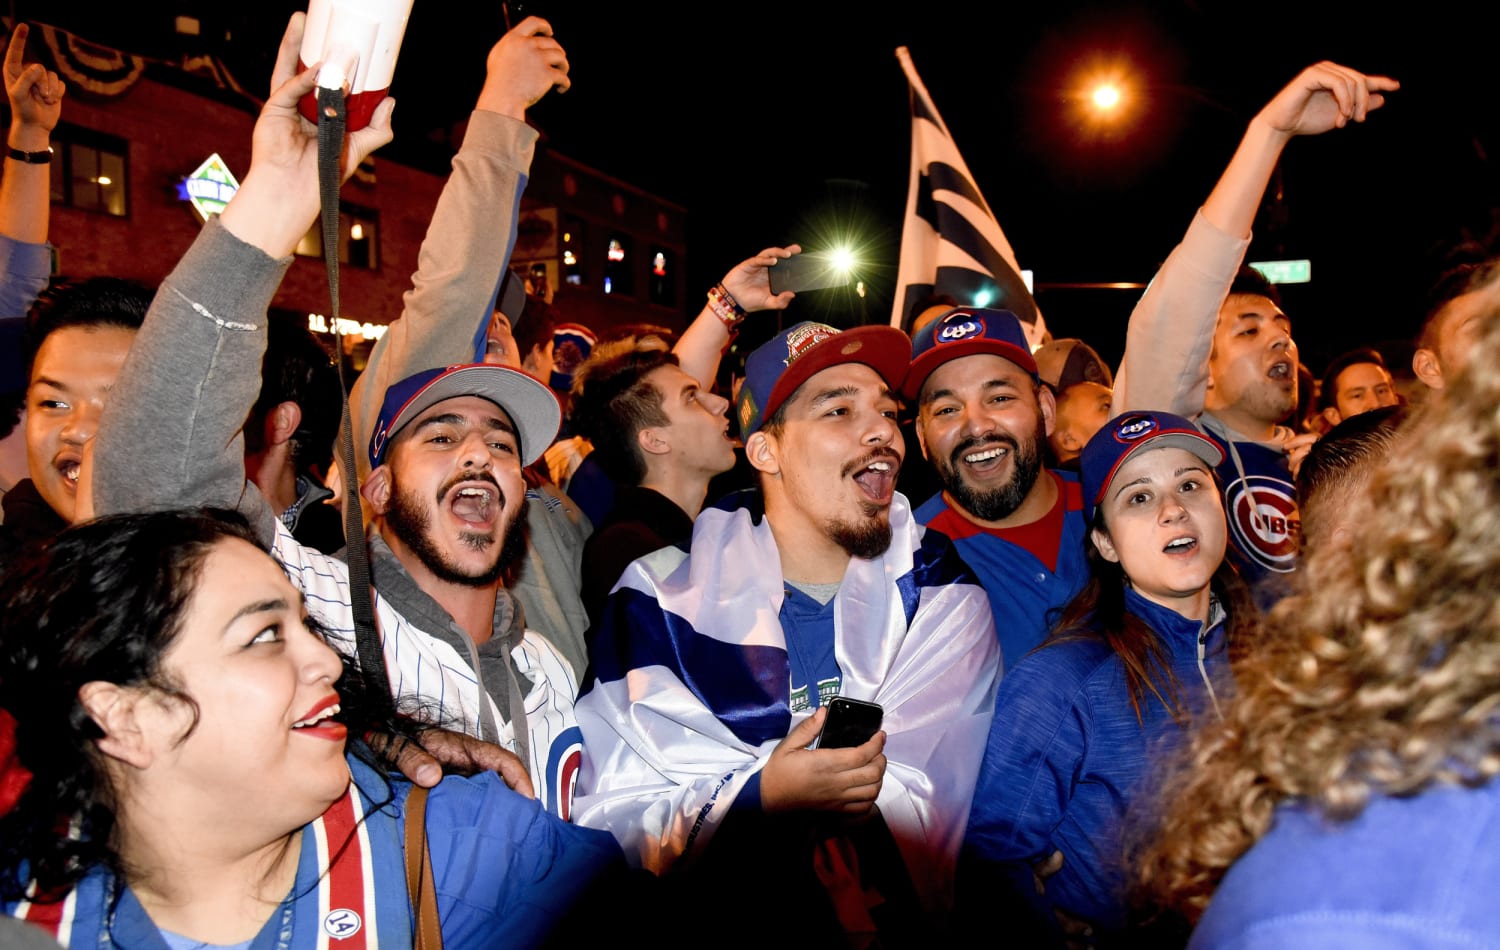 Some of the CUBS fans came together to celebrate  Chicago cubs world series,  Cubs world series, Chicago cubs fans